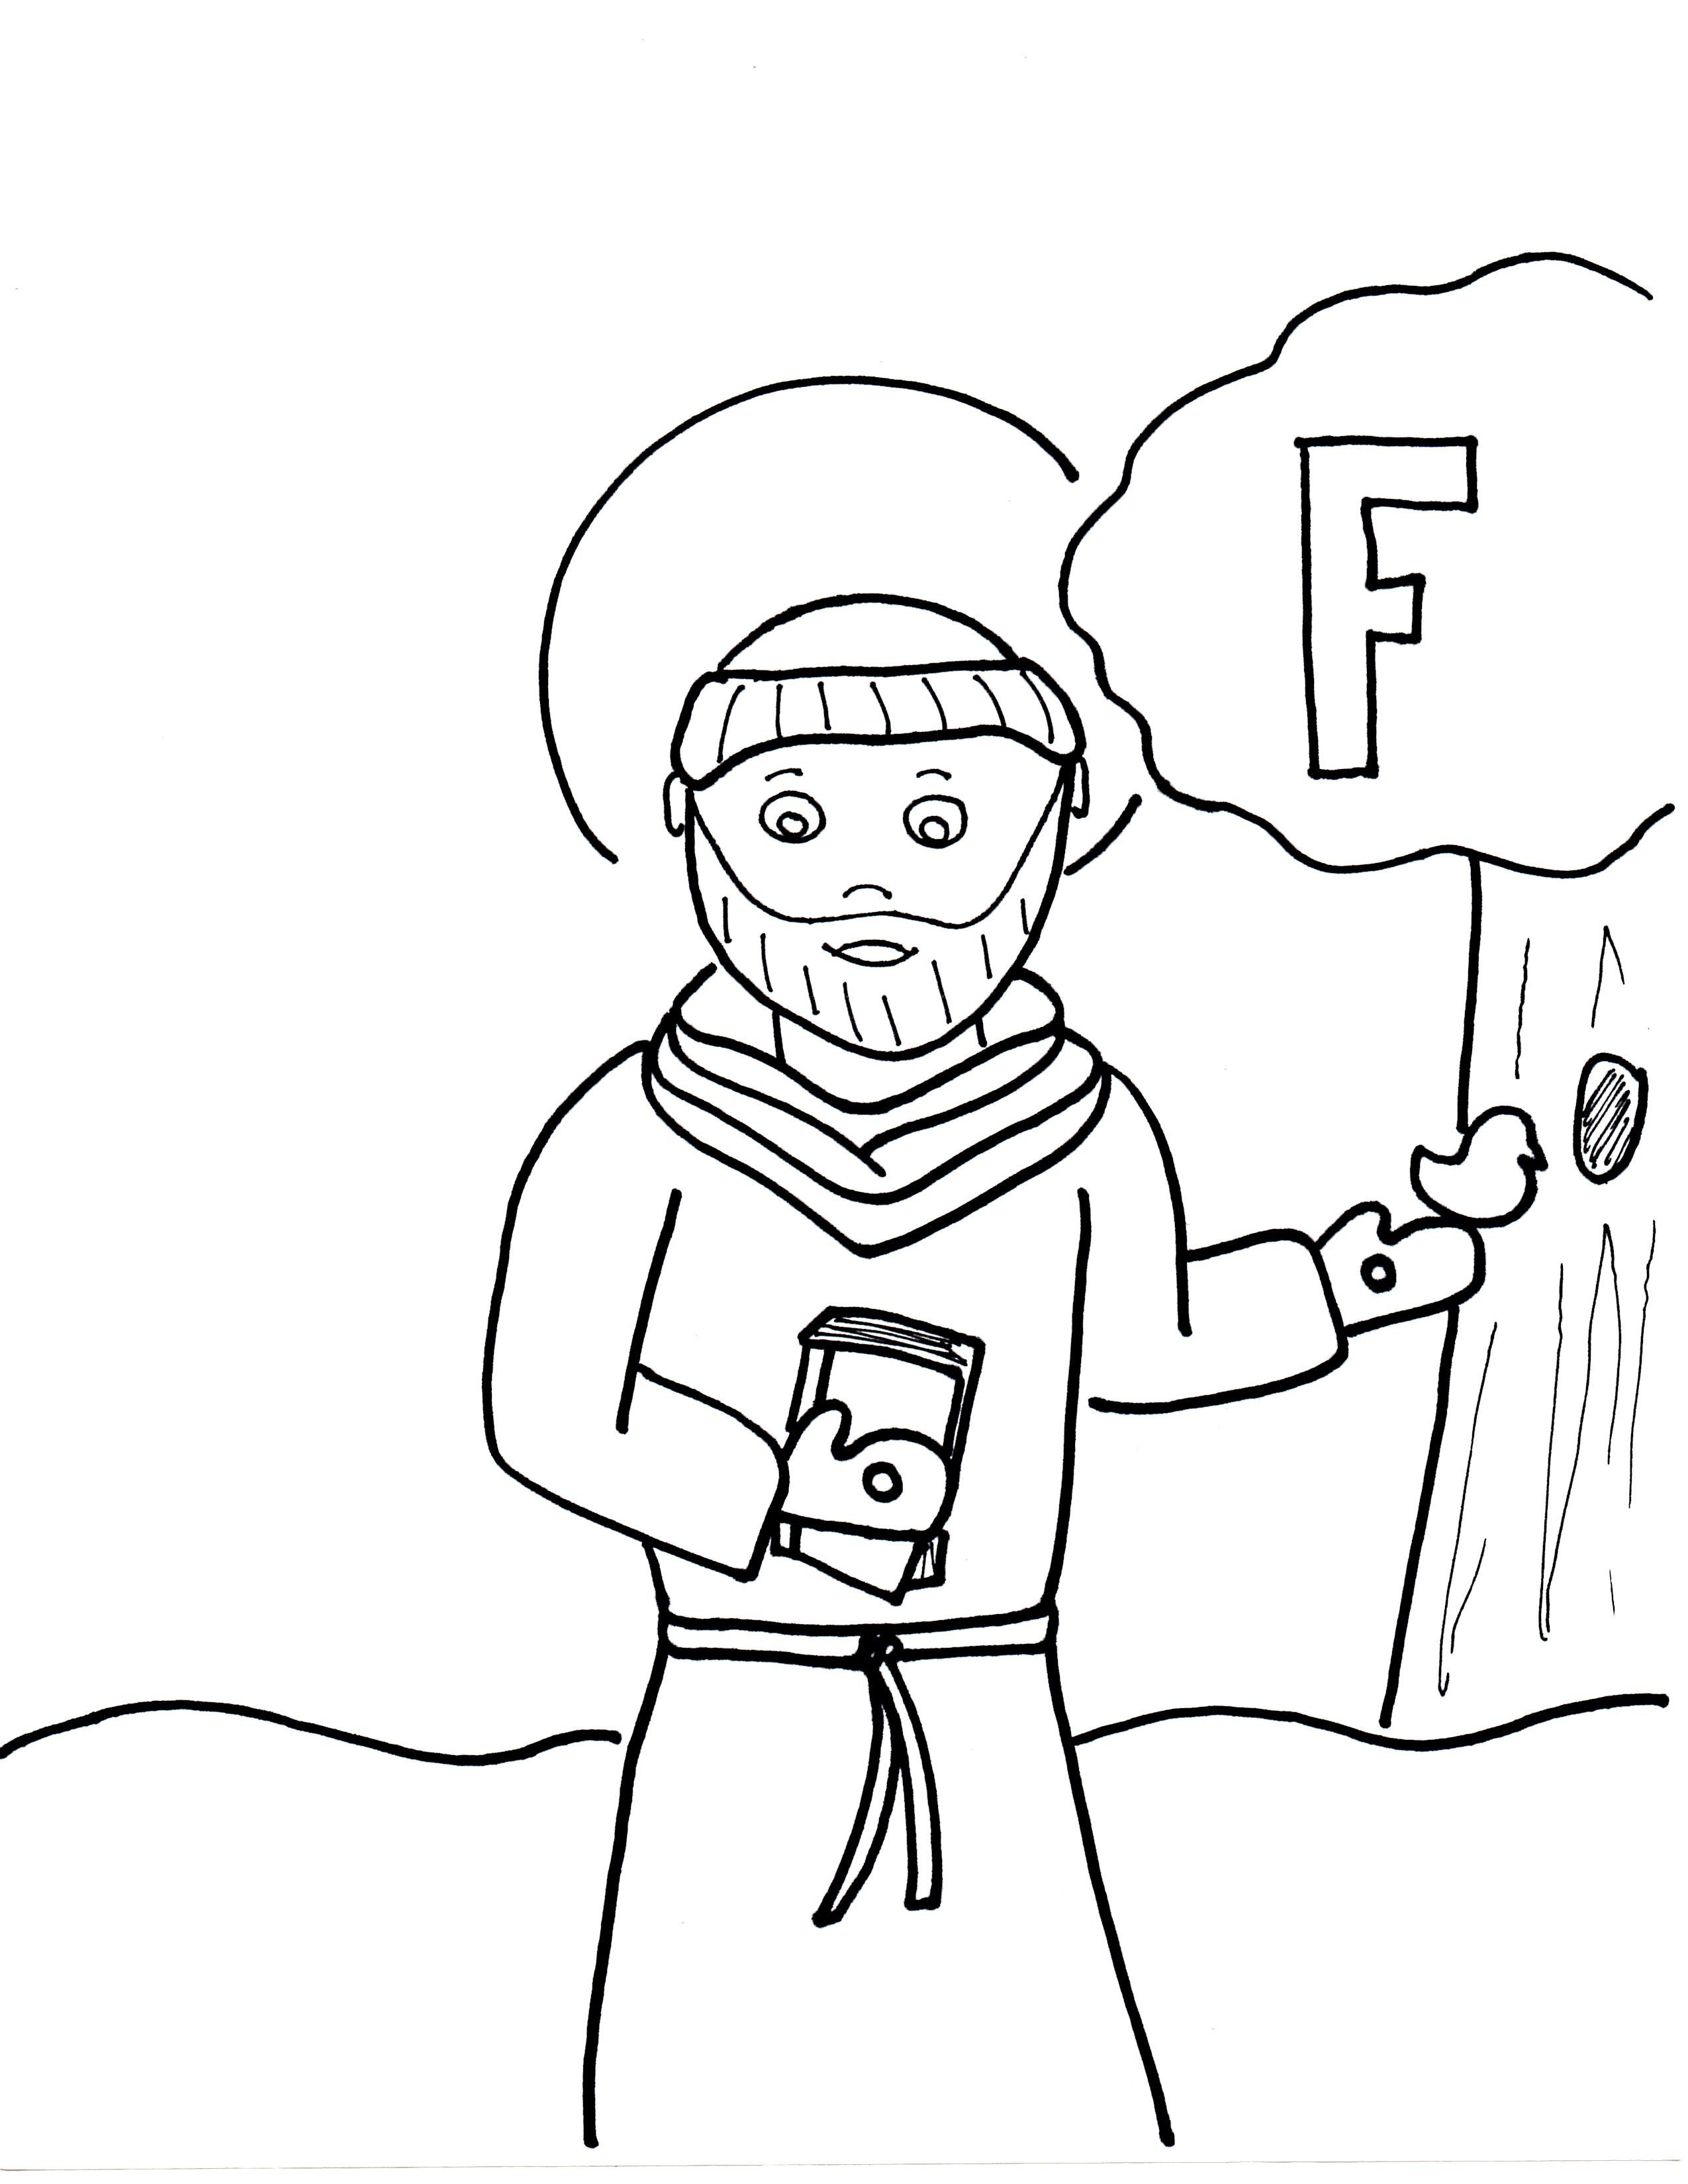 saint francis of assisi coloring pages - photo #17